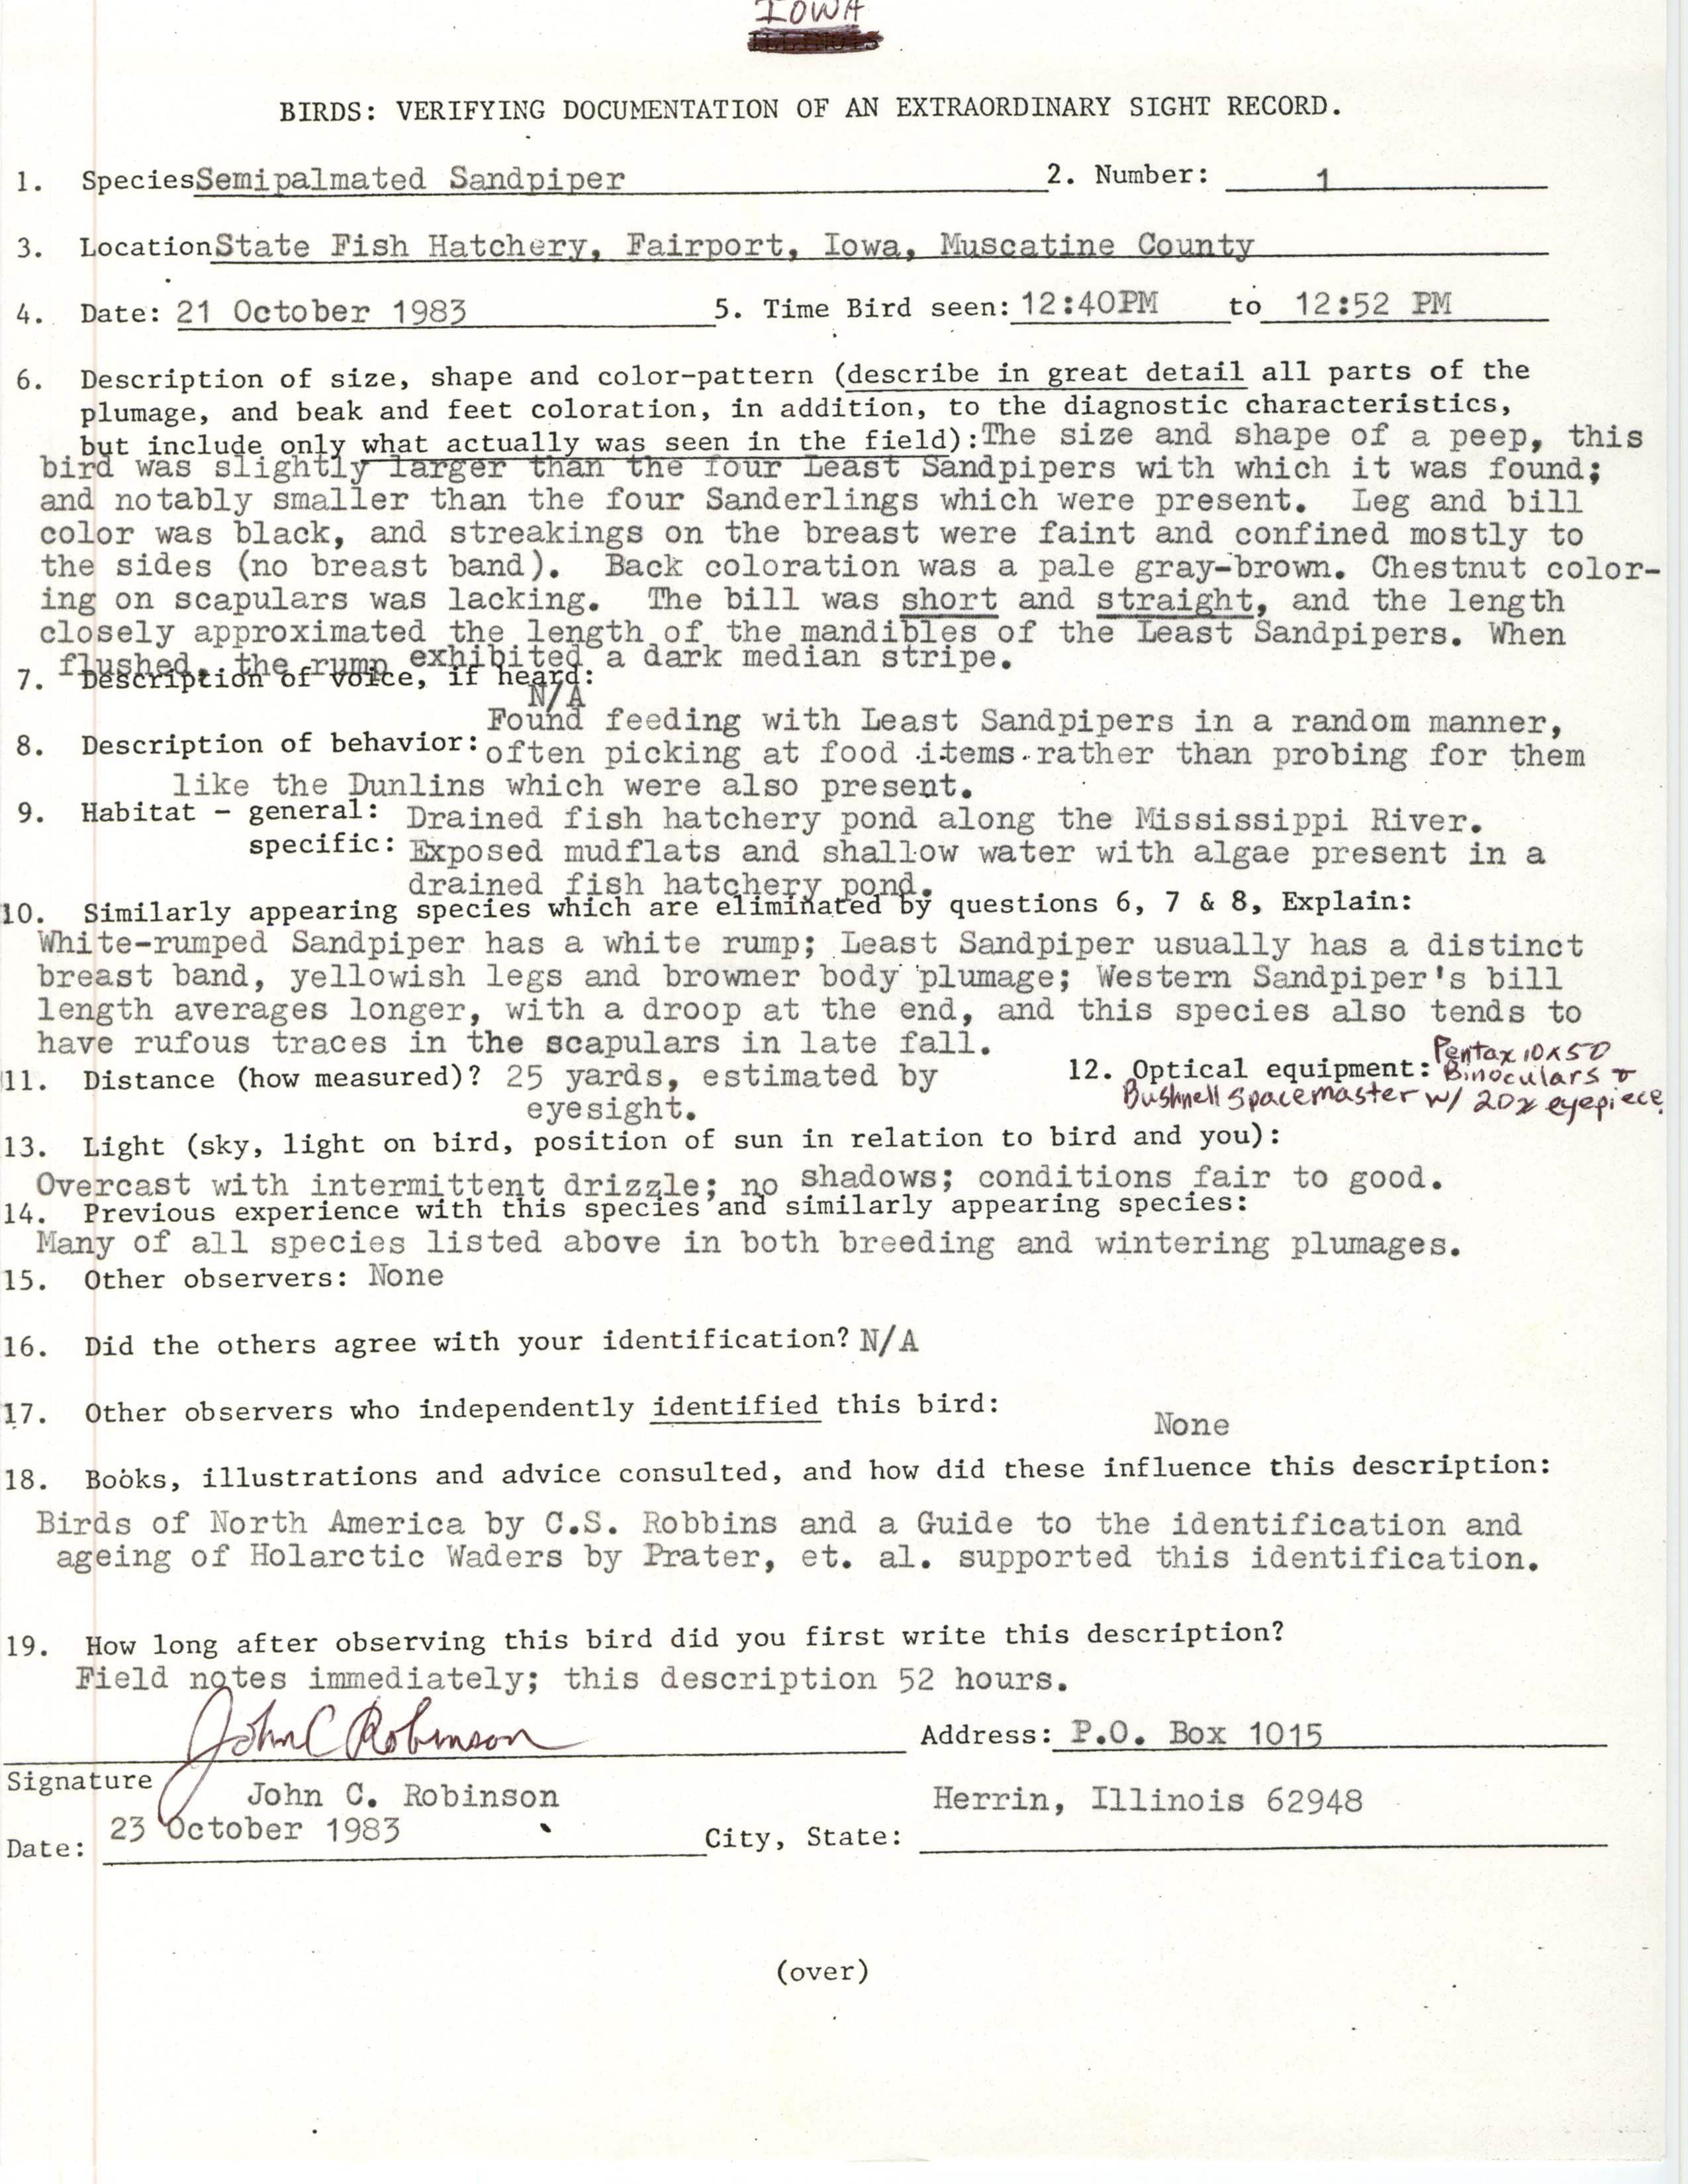 Rare bird documentation form for Semipalmated Sandpiper at Fairport State Fish Hatchery, 1983